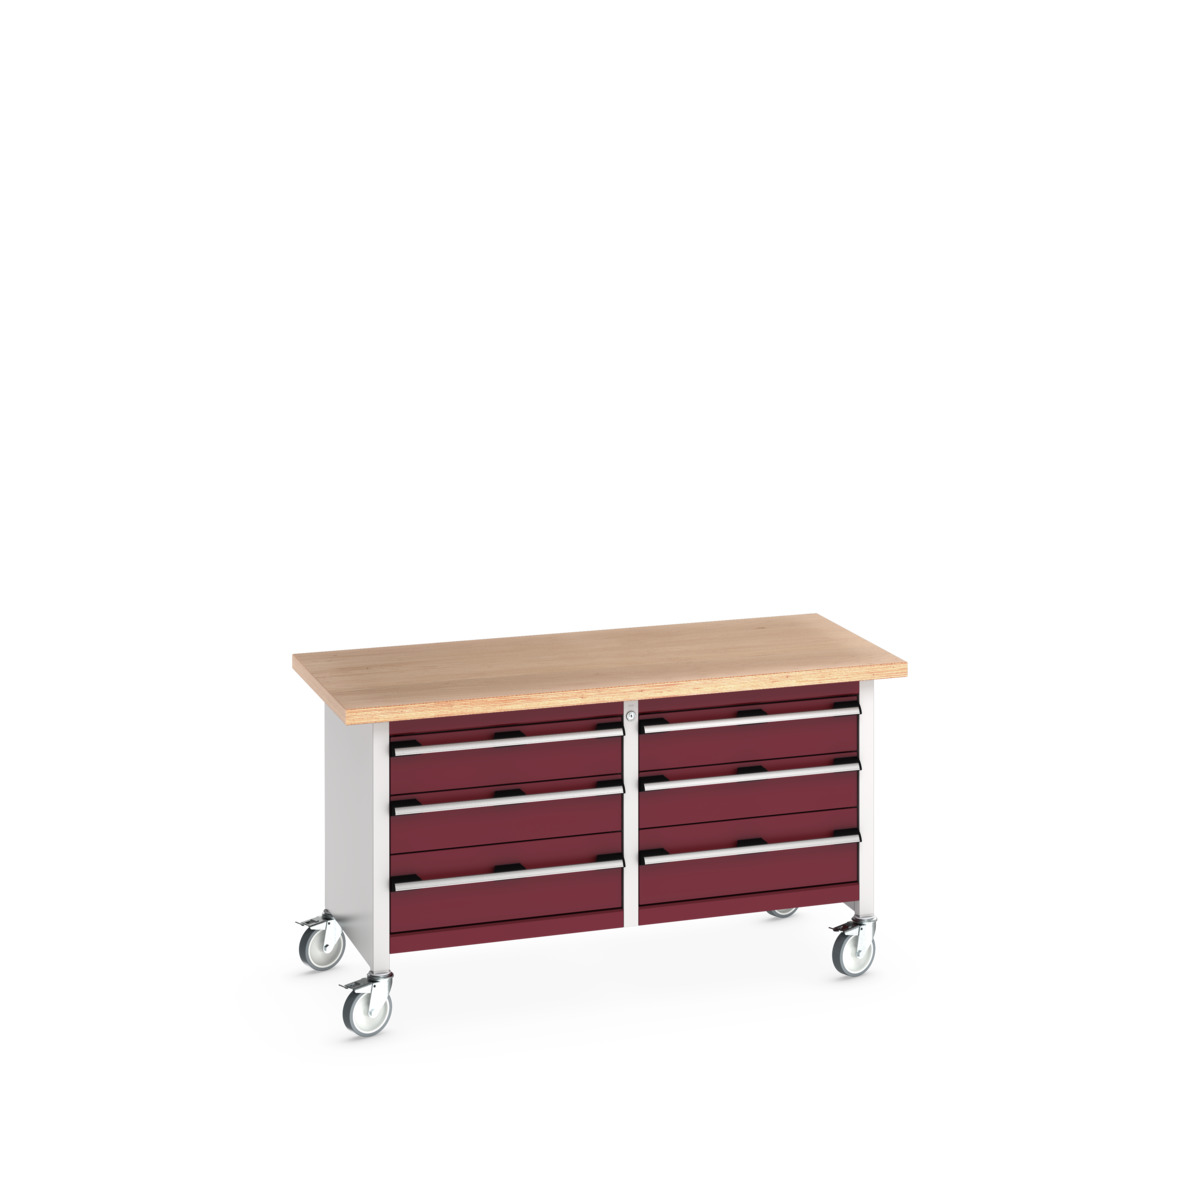 41002106.24V - cubio mobile storage bench (mpx)